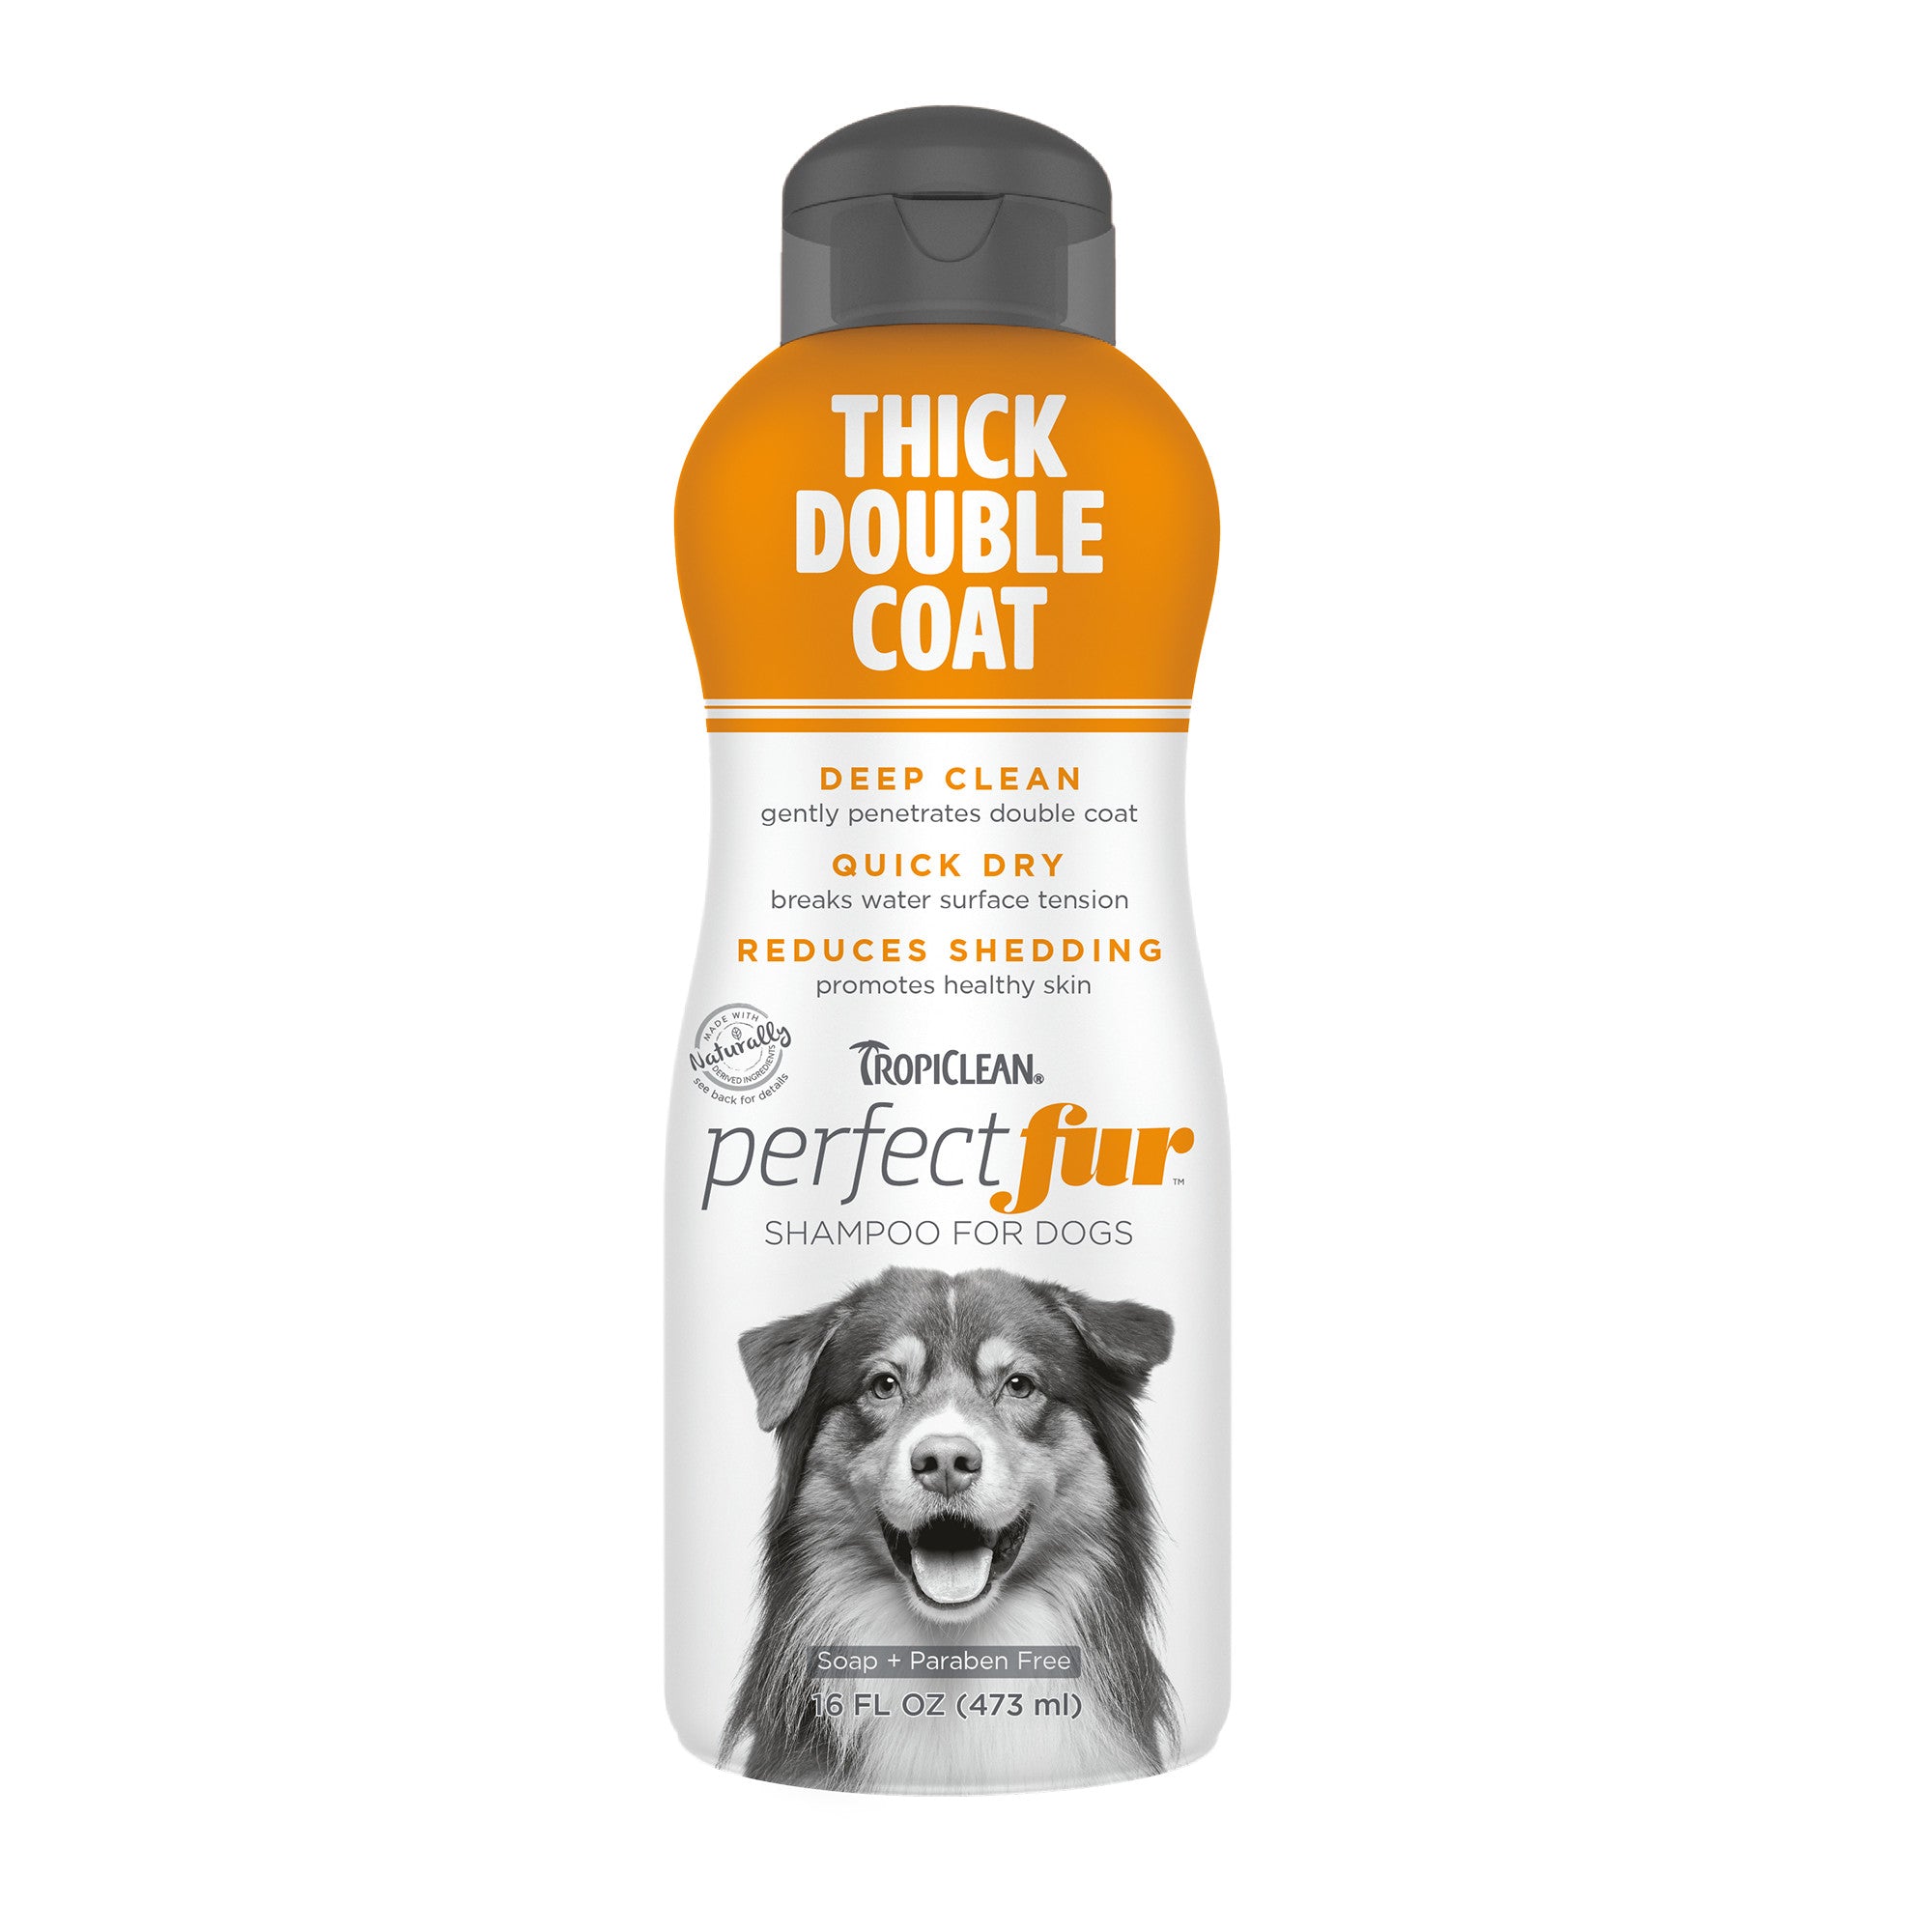 TropiClean PerfectFur Thick Double Coated Dog Shampoo 473ml - Tilly's Treat Cupboard